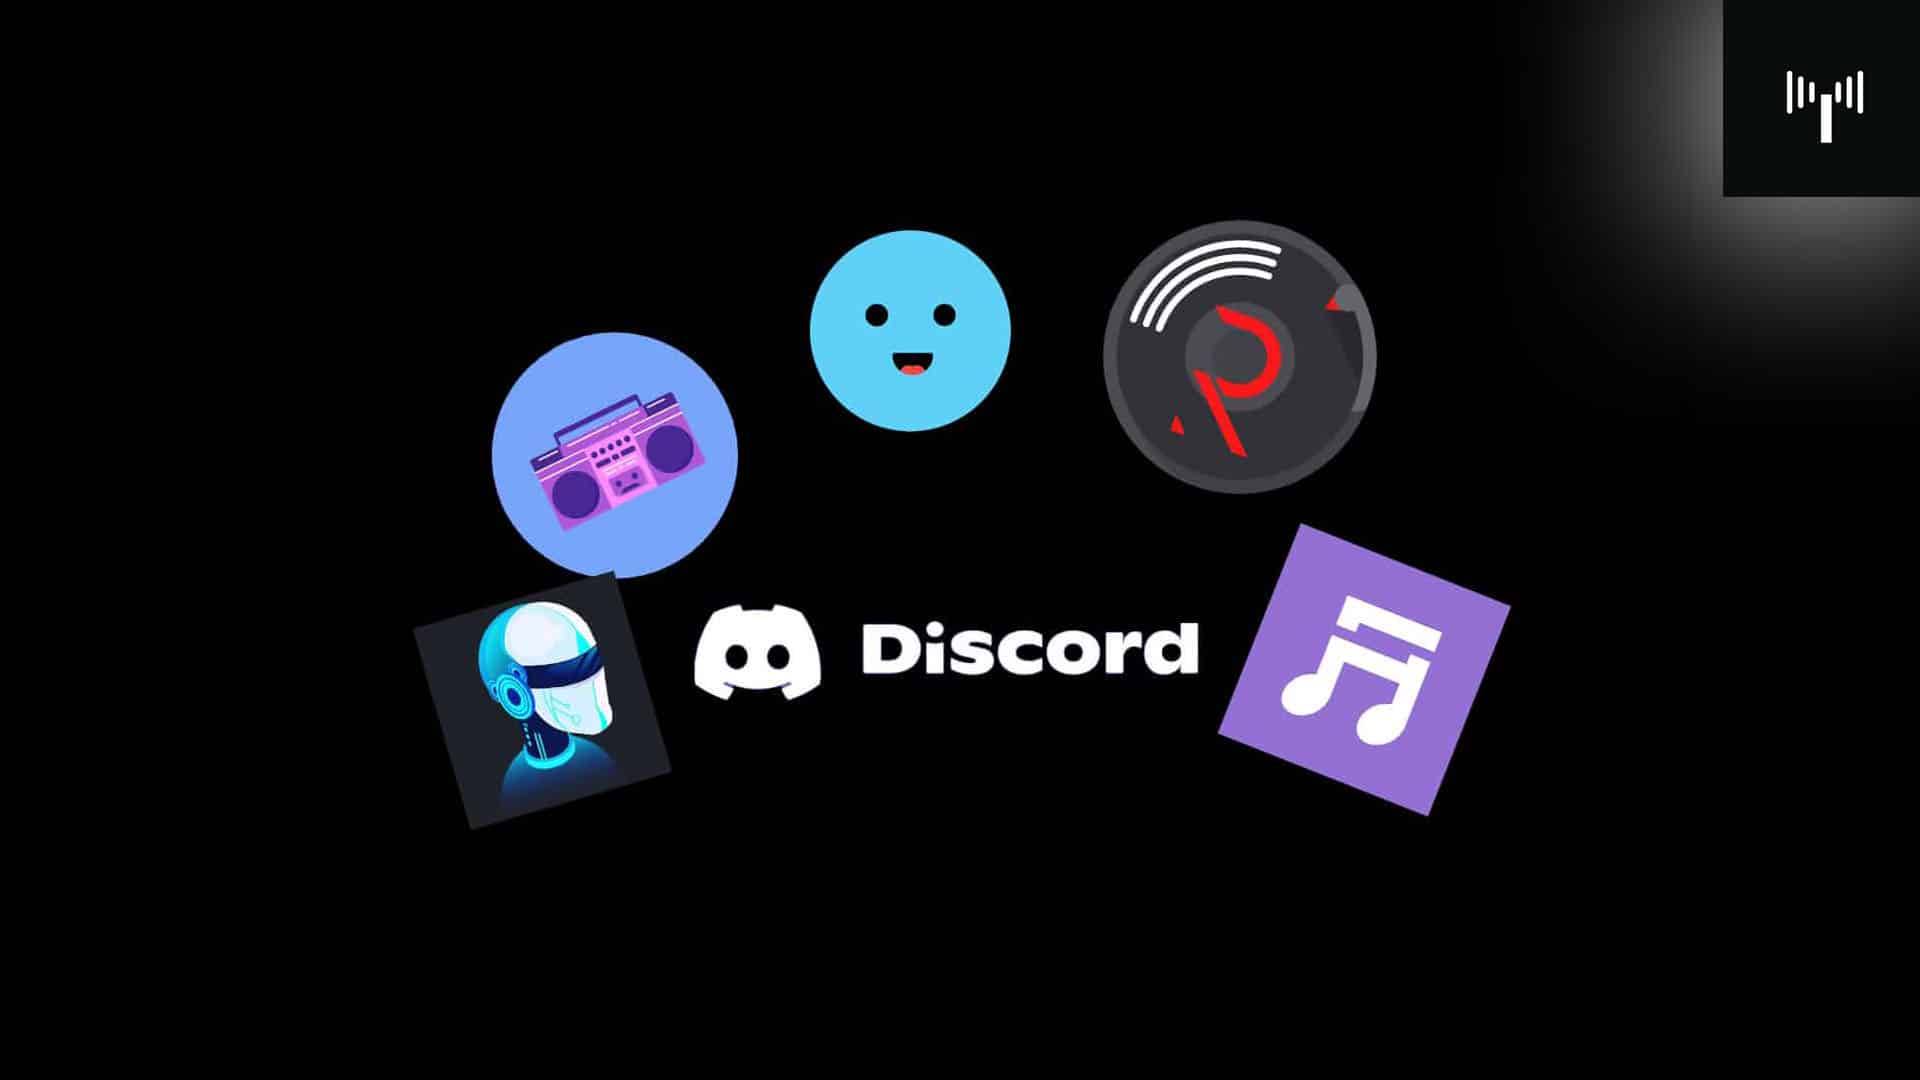 Trends Music - Discord Bots